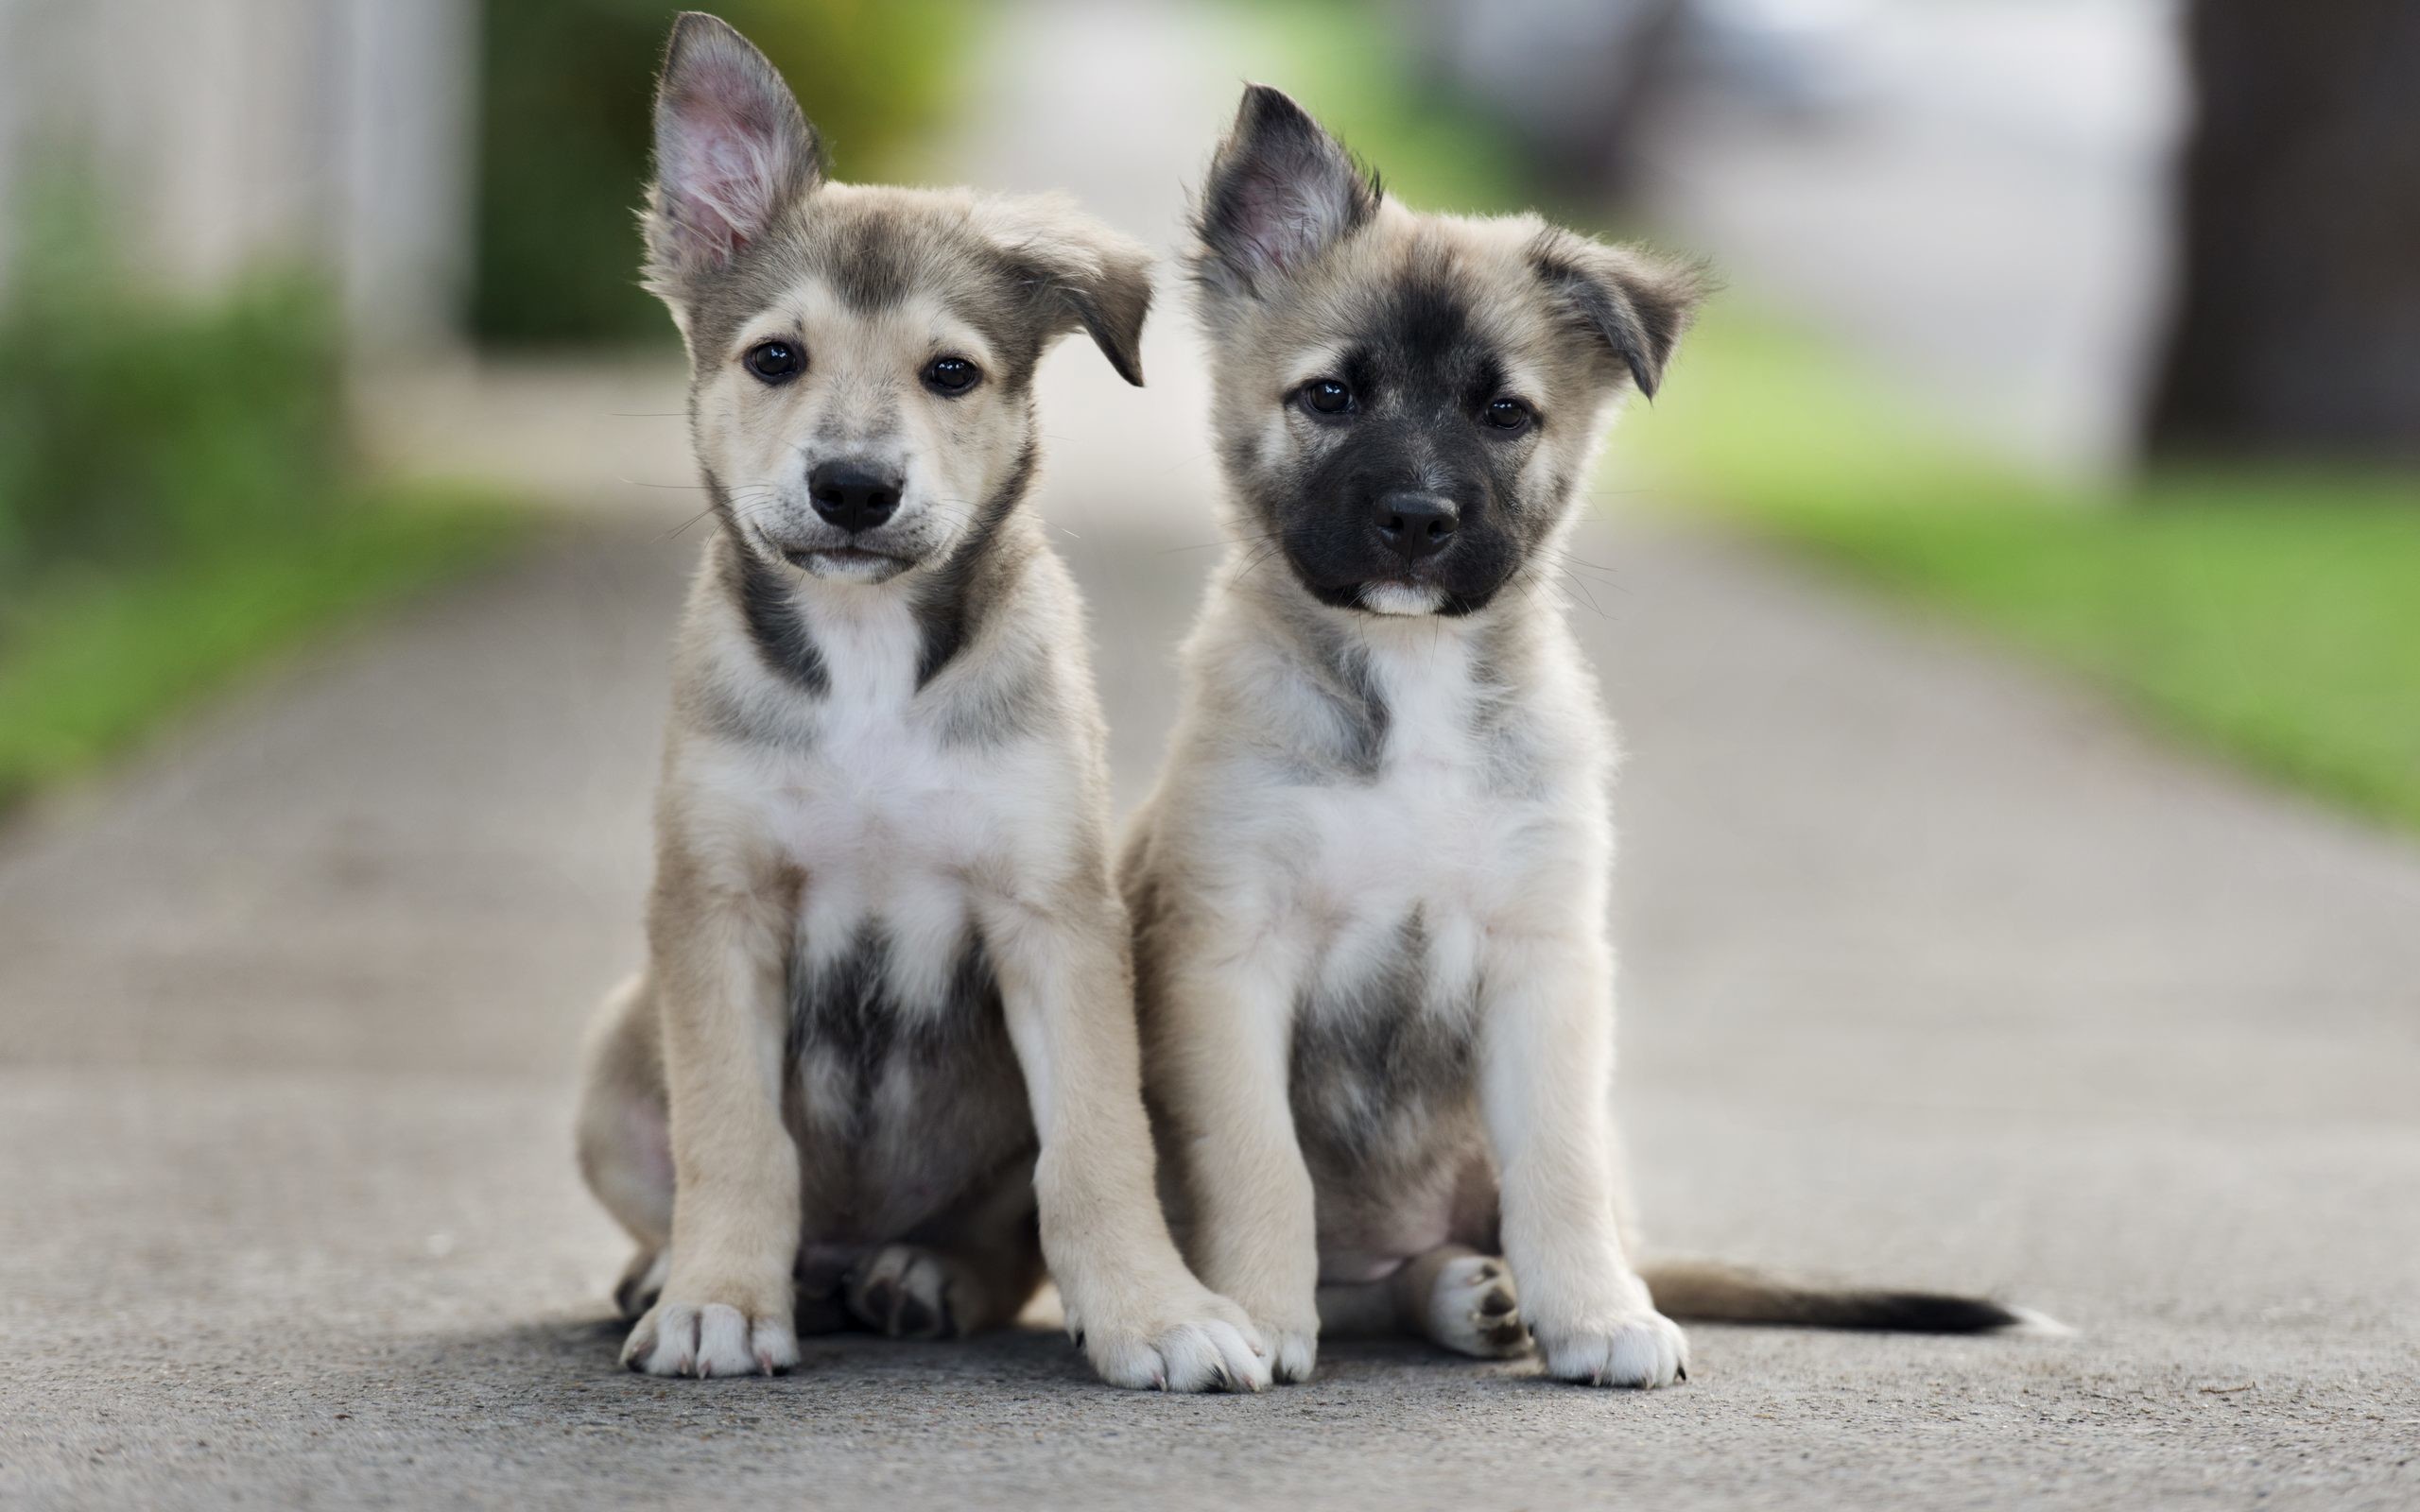 2560x1600 Cute Puppies Wallpaper HD Download For Desktop and Mobile